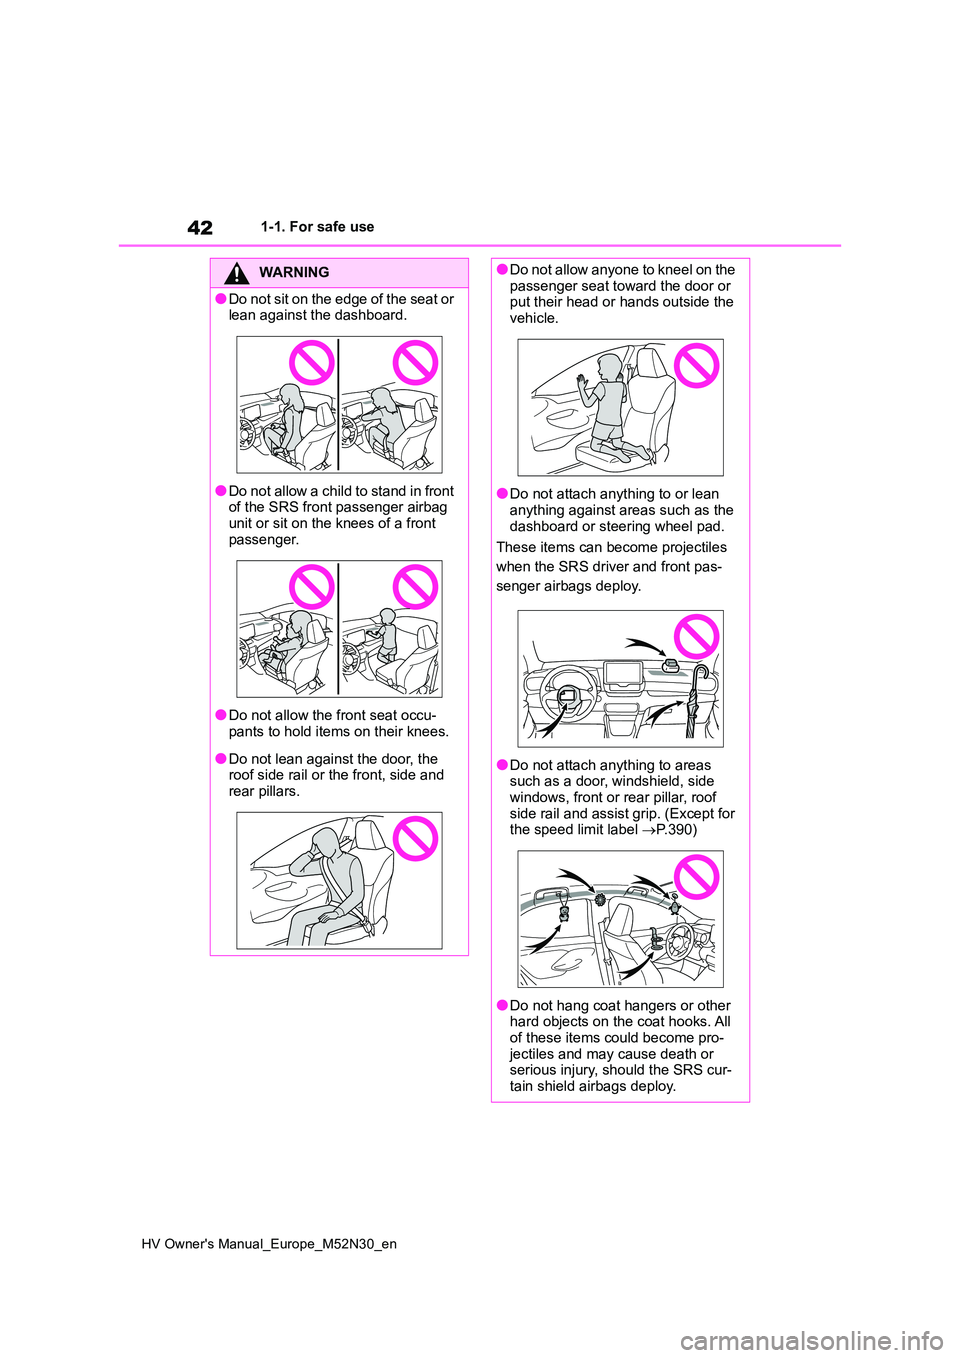 TOYOTA YARIS 2022 User Guide 42
HV Owner's Manual_Europe_M52N30_en
1-1. For safe use
WARNING
●Do not sit on the edge of the seat or  lean against the dashboard.
●Do not allow a child to stand in front of the SRS front pas